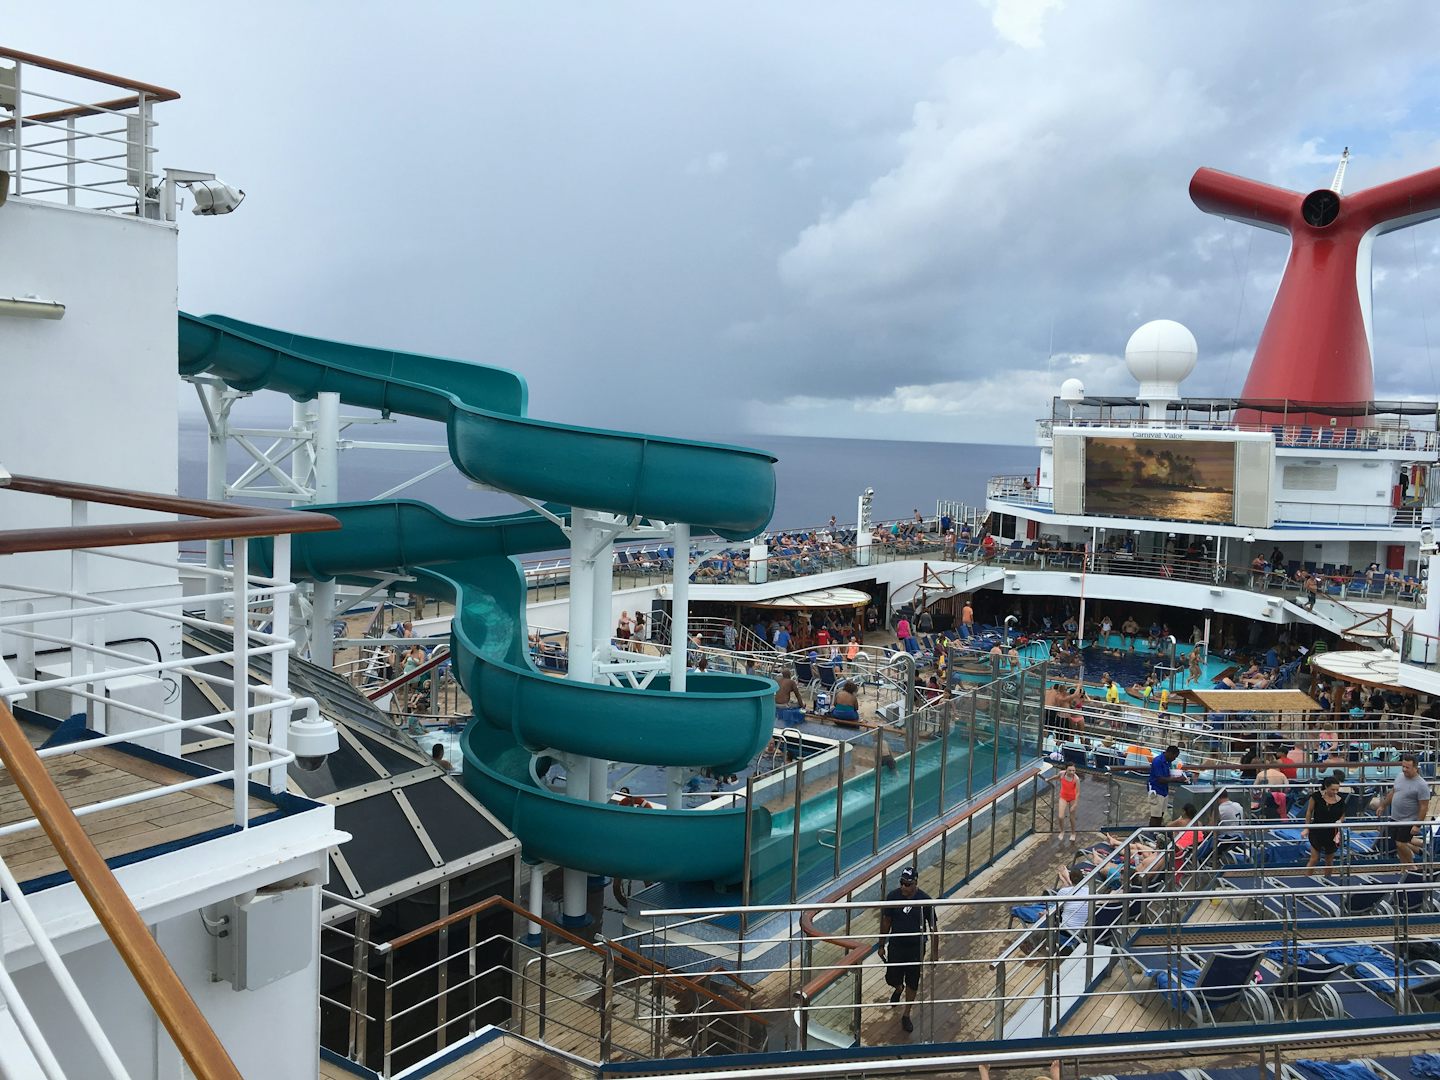 Day at sea and a very busy Lido deck.